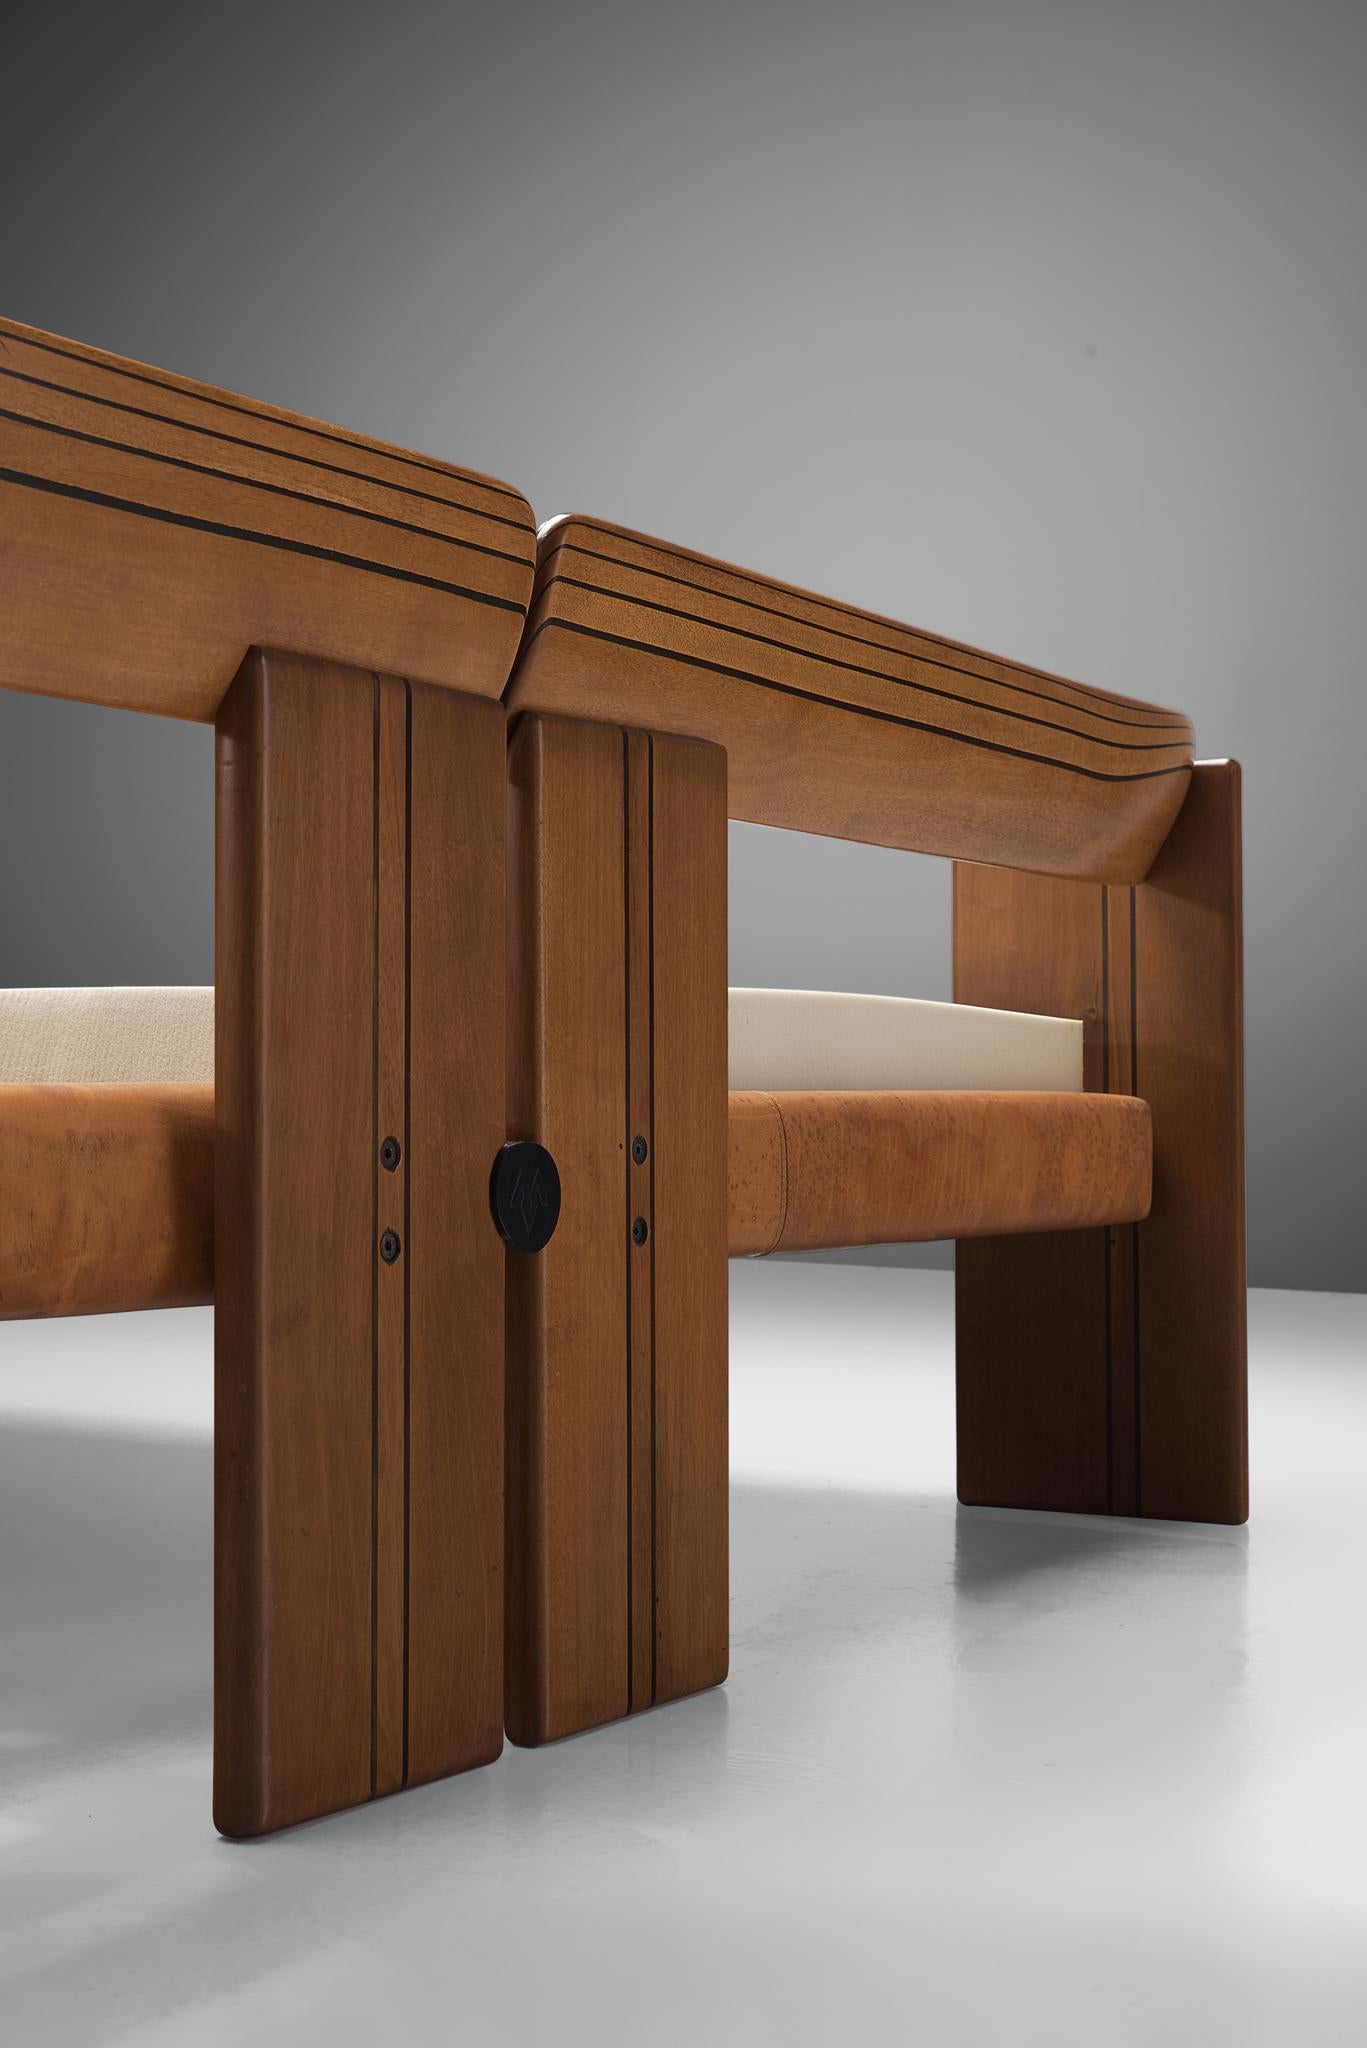 Leather Afra & Tobia Scarpa 'Artona' Bed with Nightstands